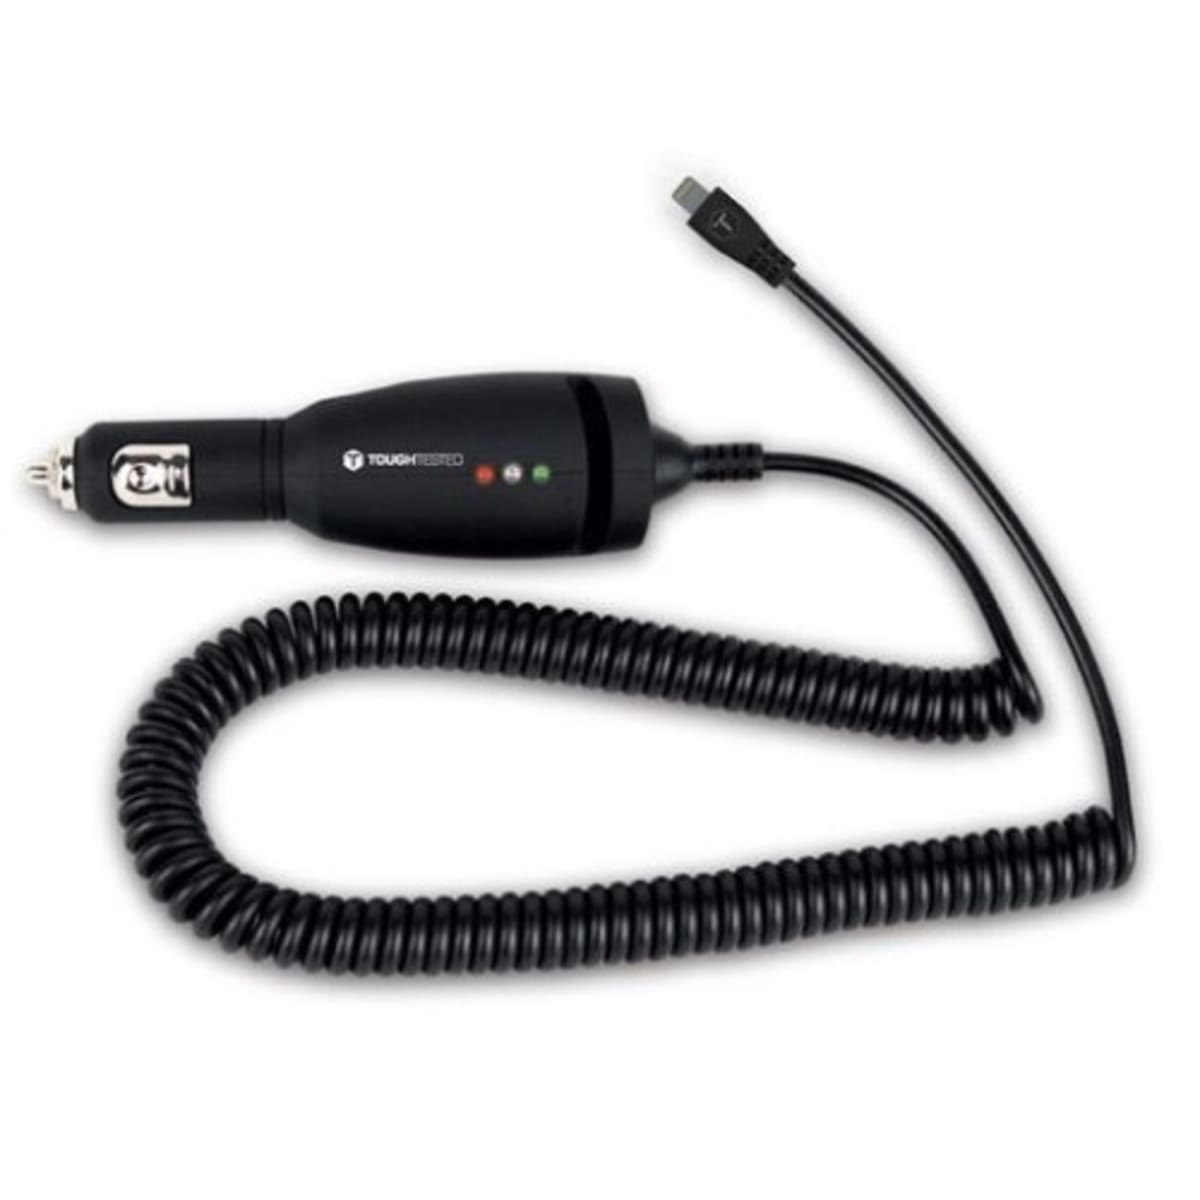 Pro+ Rapid Car Charger with Heavy Gauge Cord with Micro-USB & TYPE